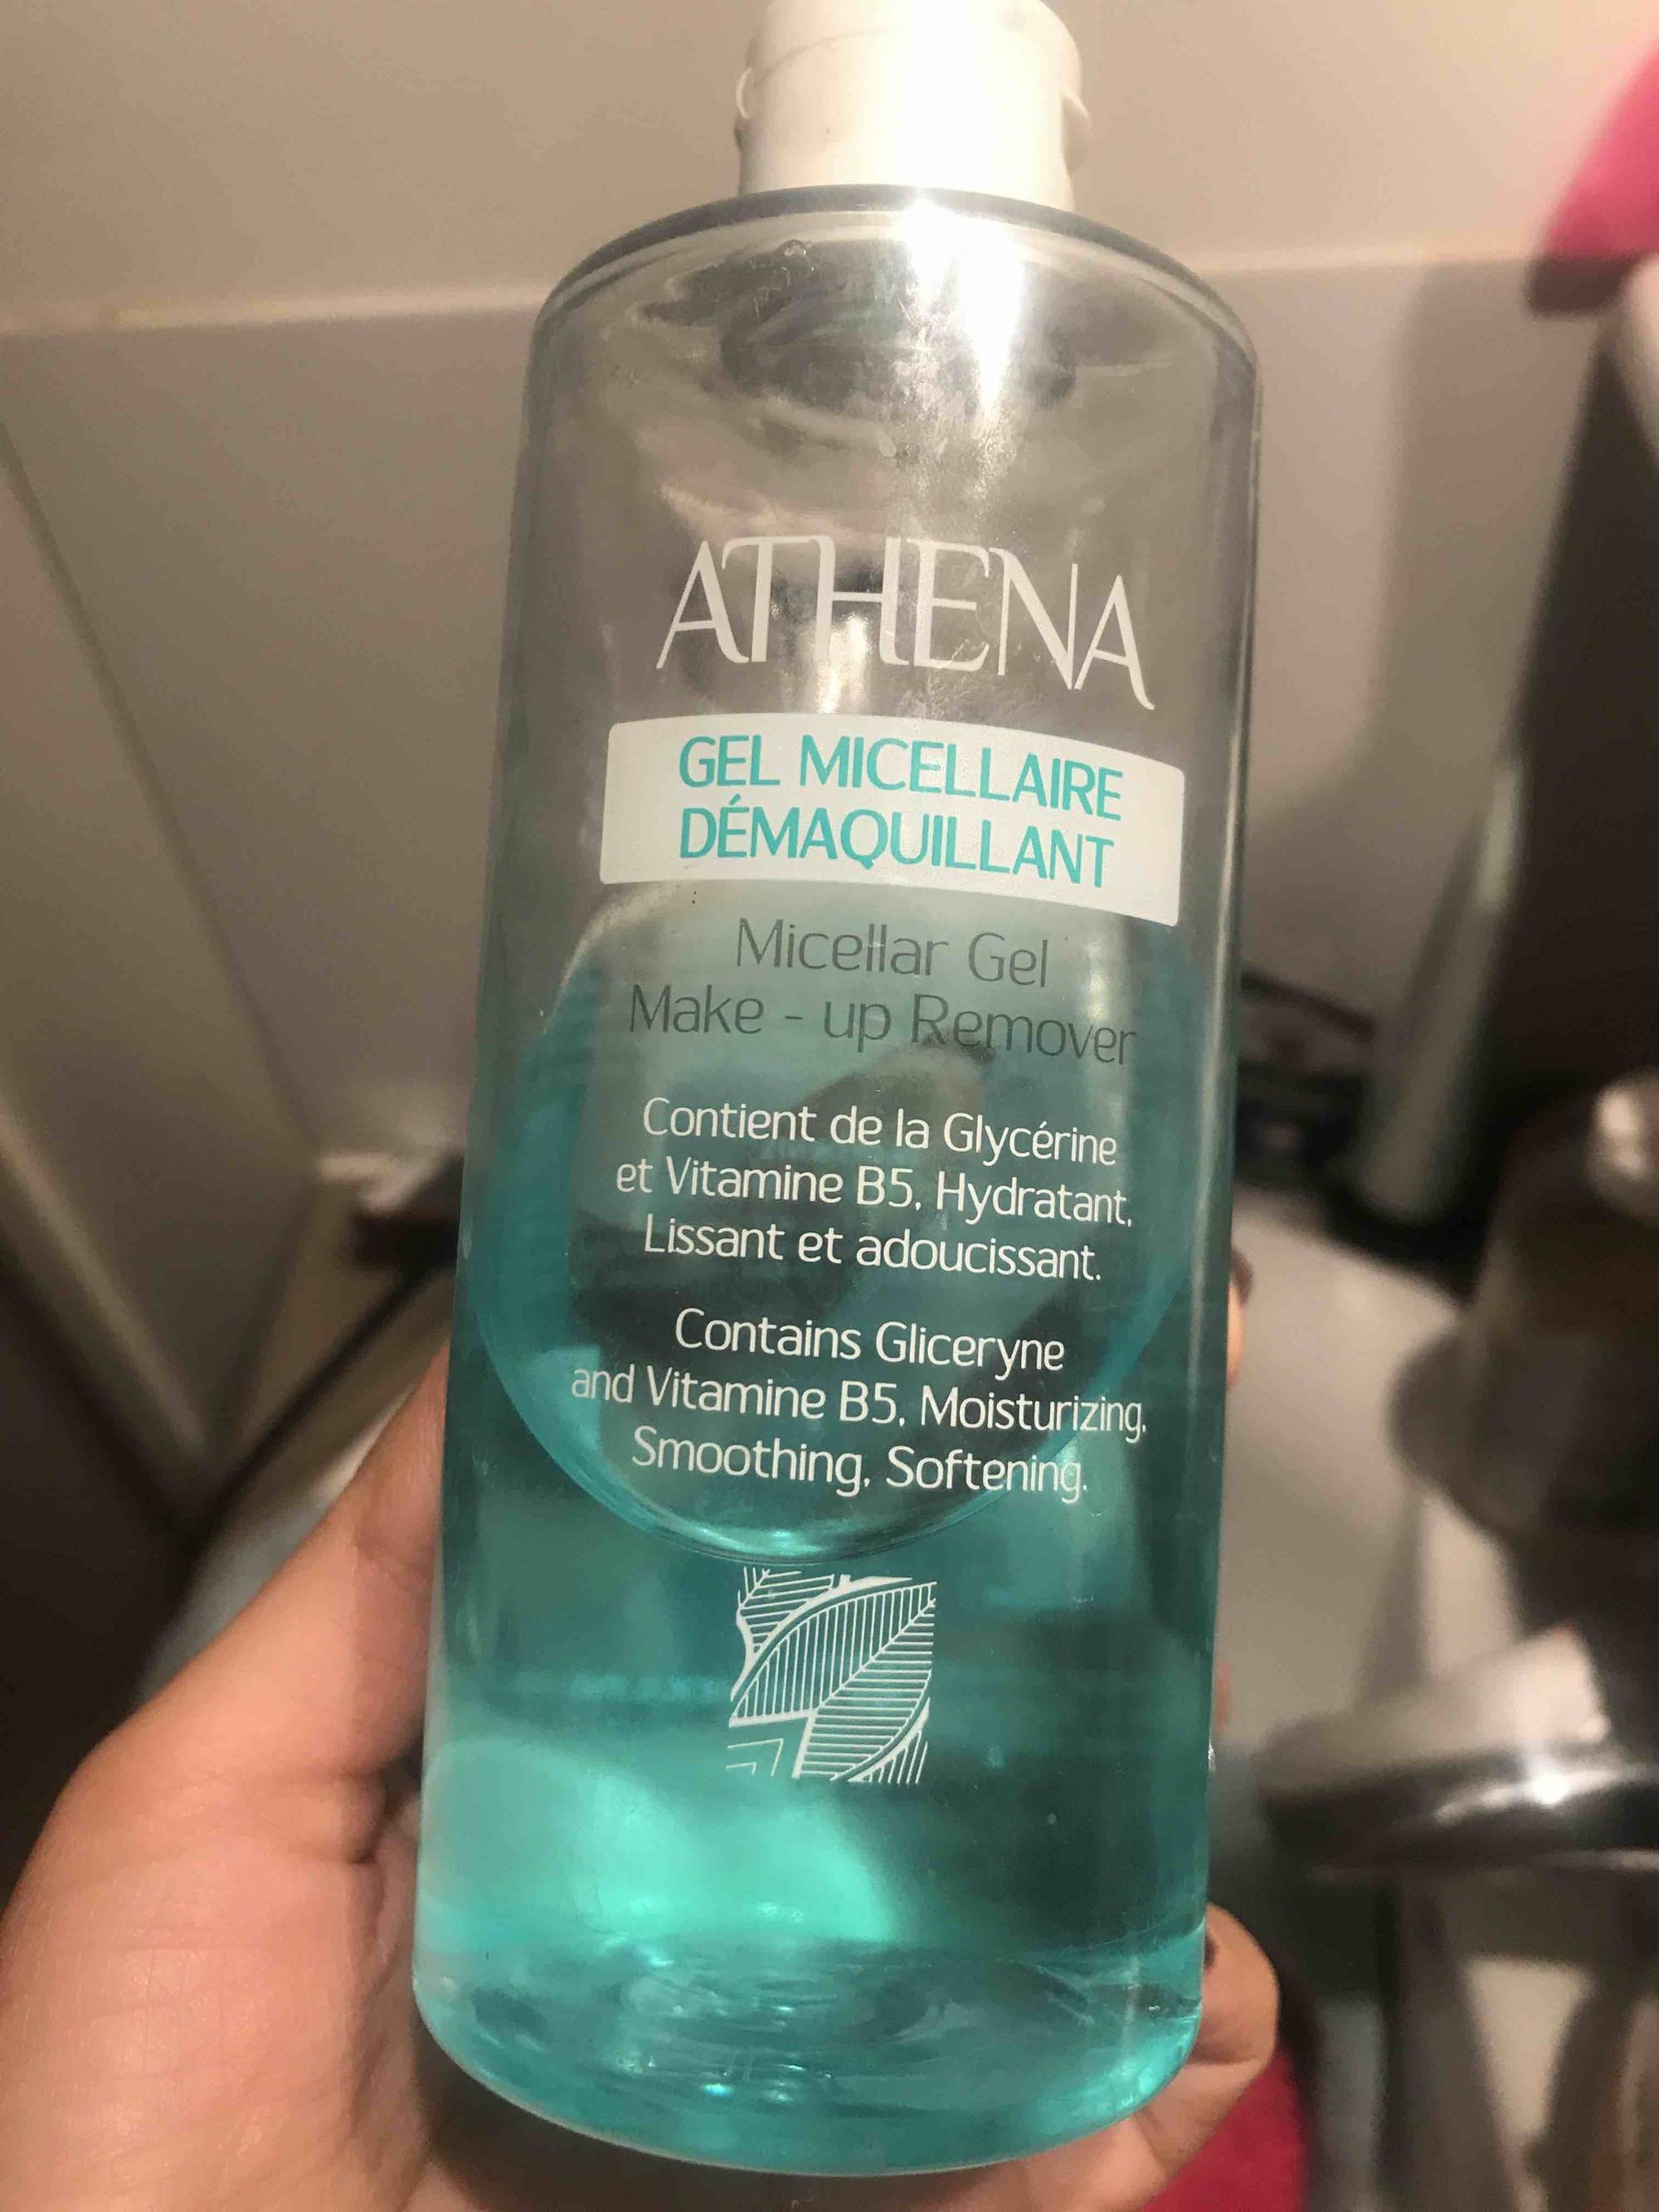 ATHENA - Gel micellaire démaquillant